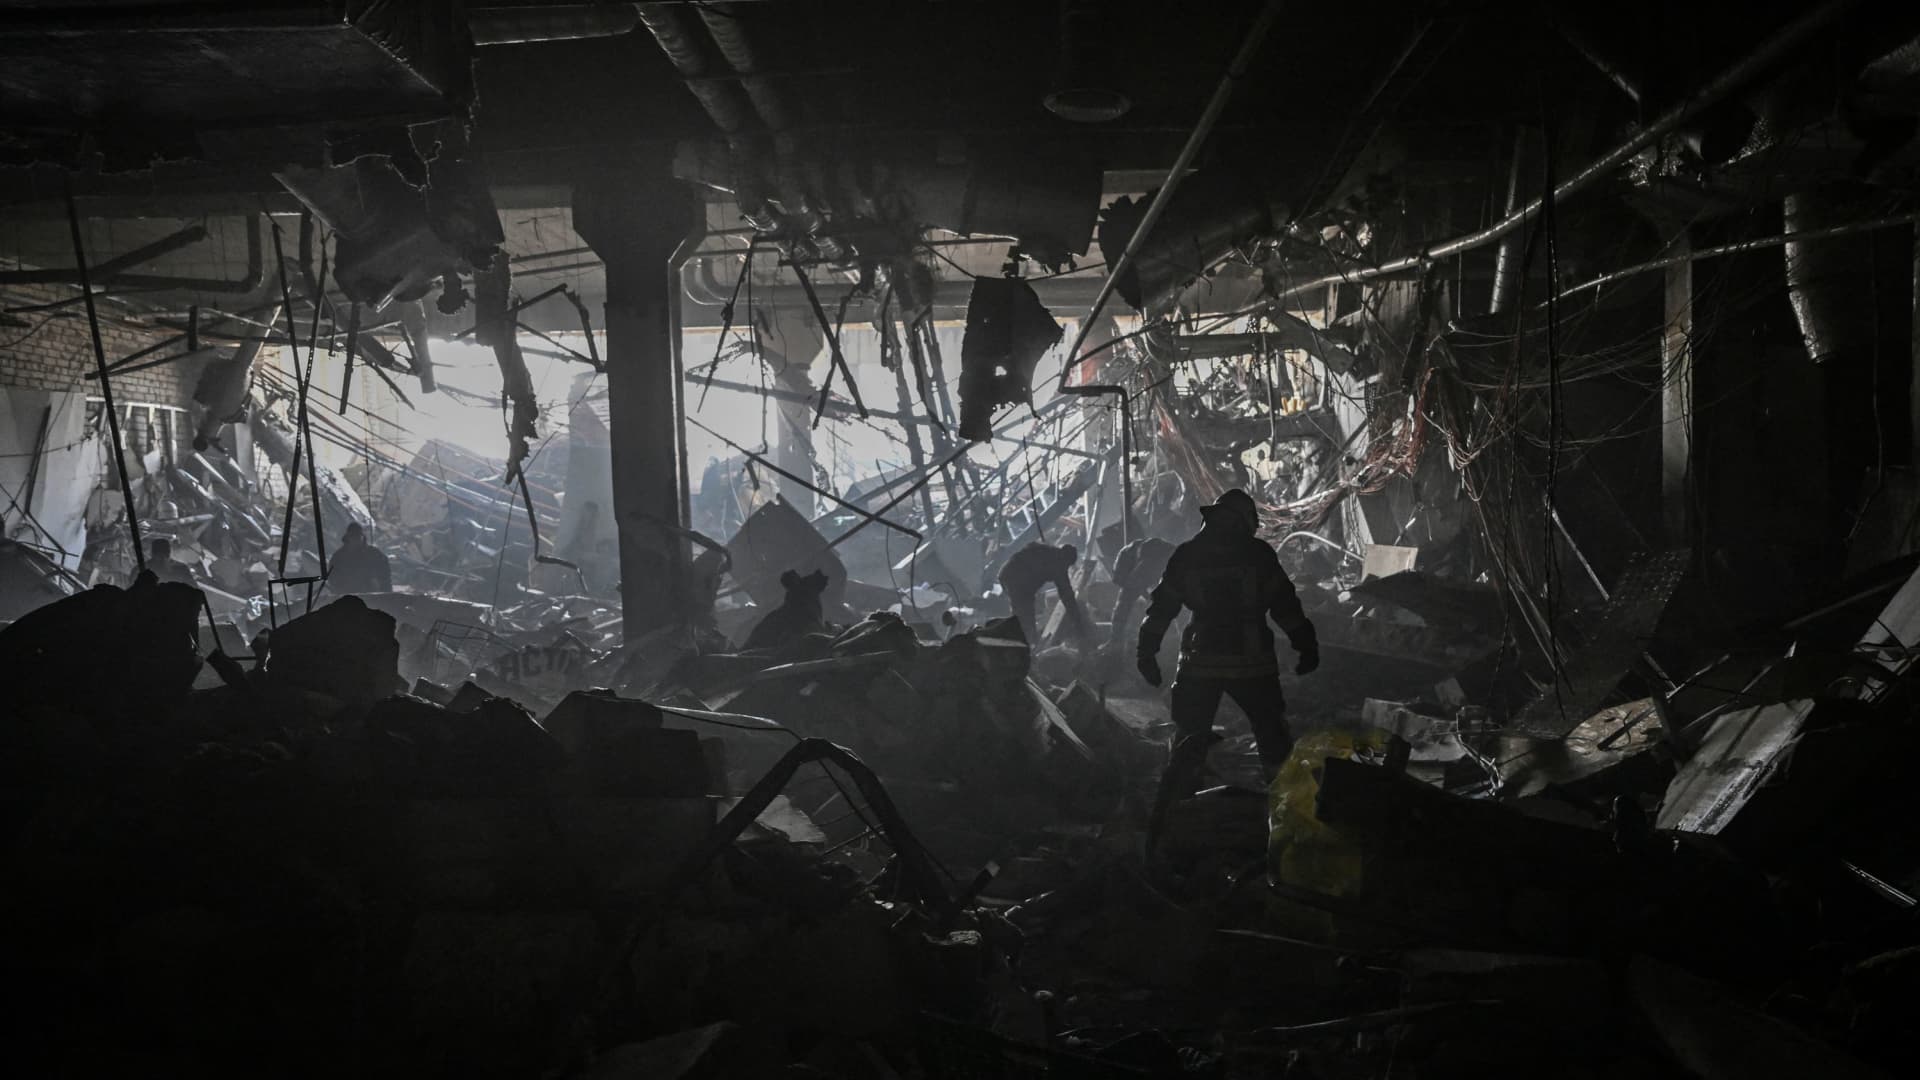 A Ukranian serviceman walks between debris inside the Retroville shopping mall after a Russian attack on the northwest of the capital Kyiv on March 21, 2022.